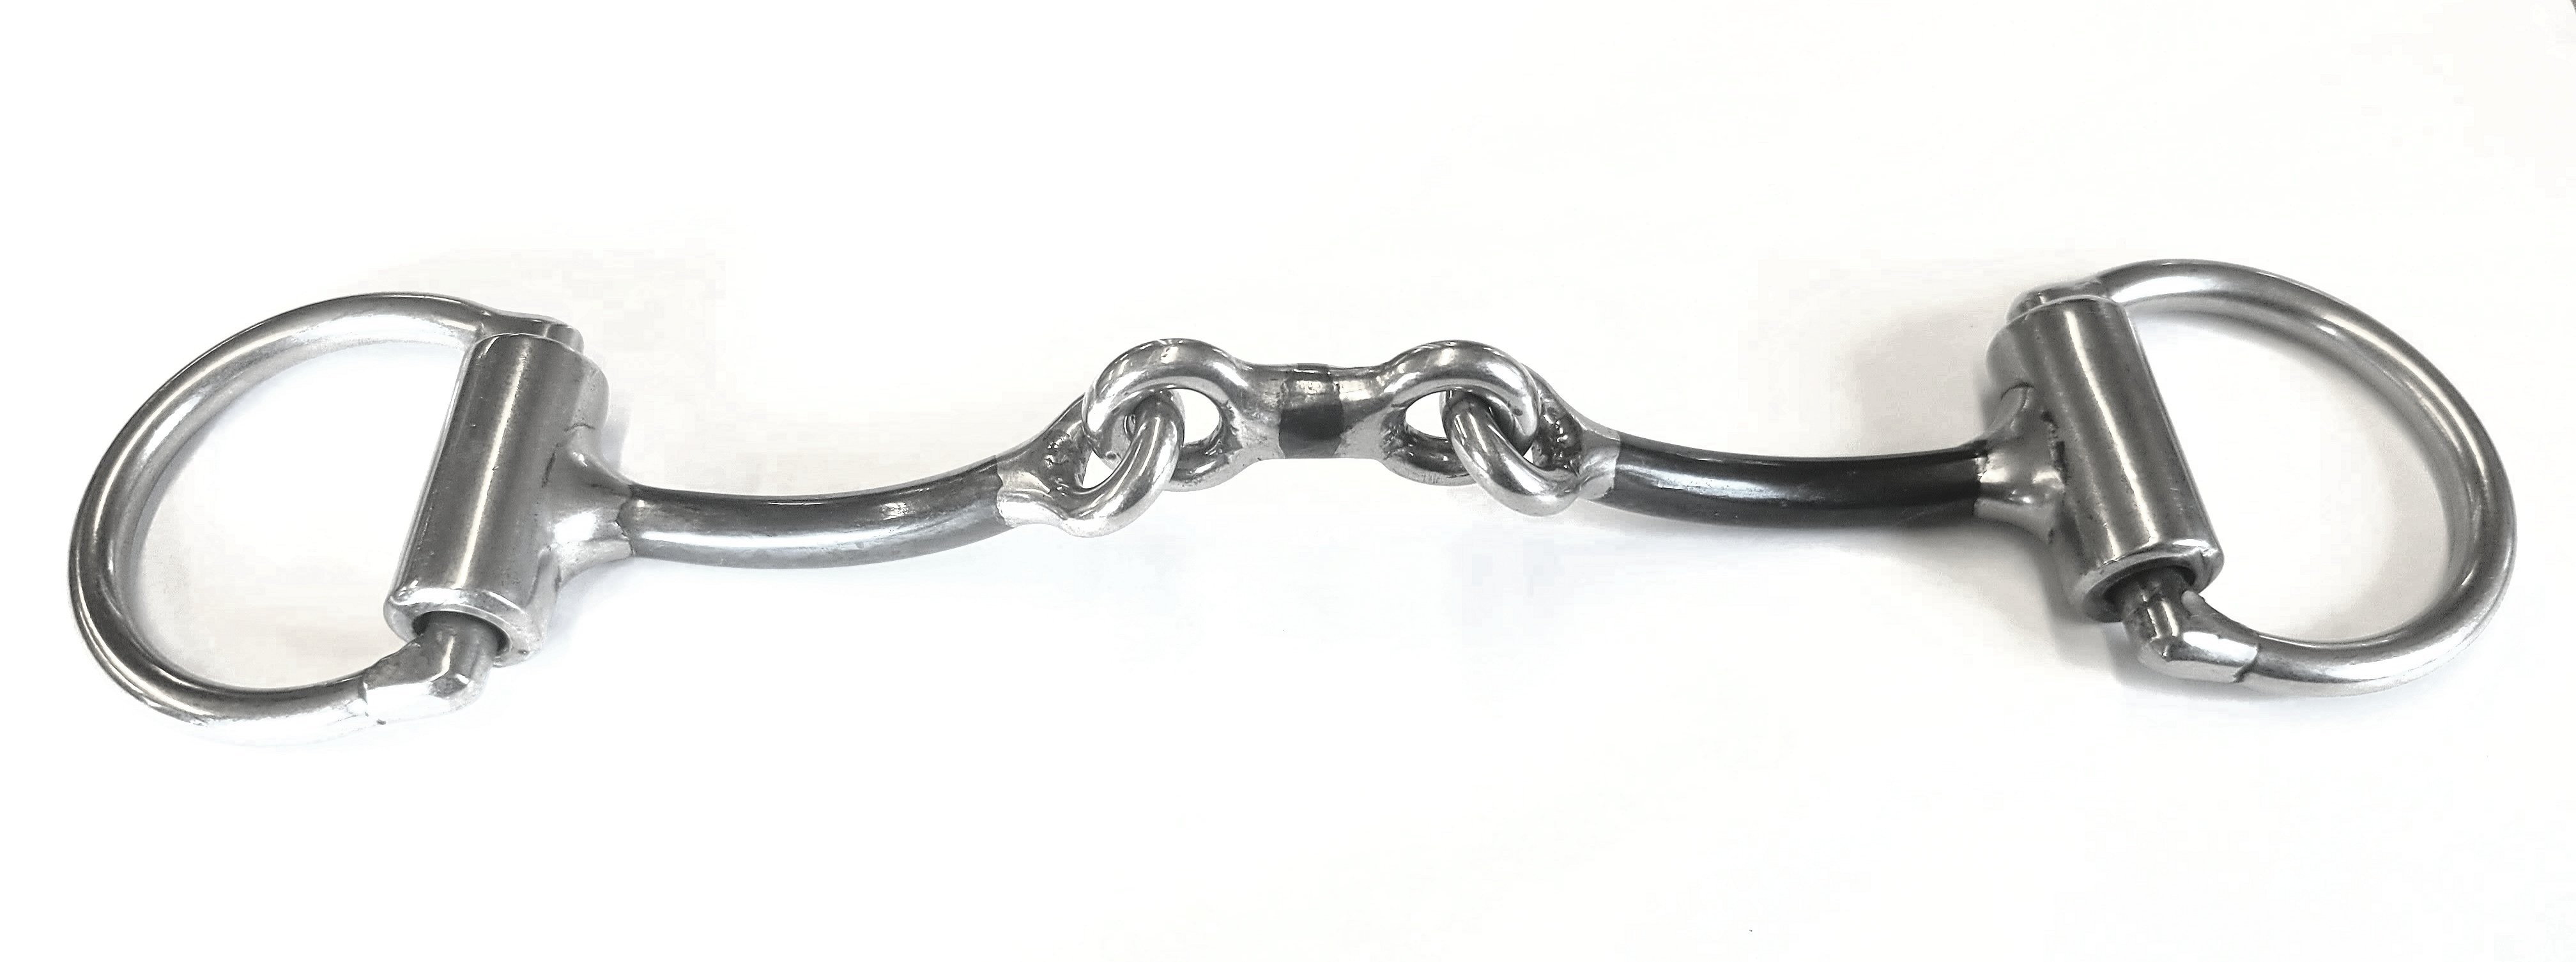 1/4" Smooth Snaffle with dogbone in the center